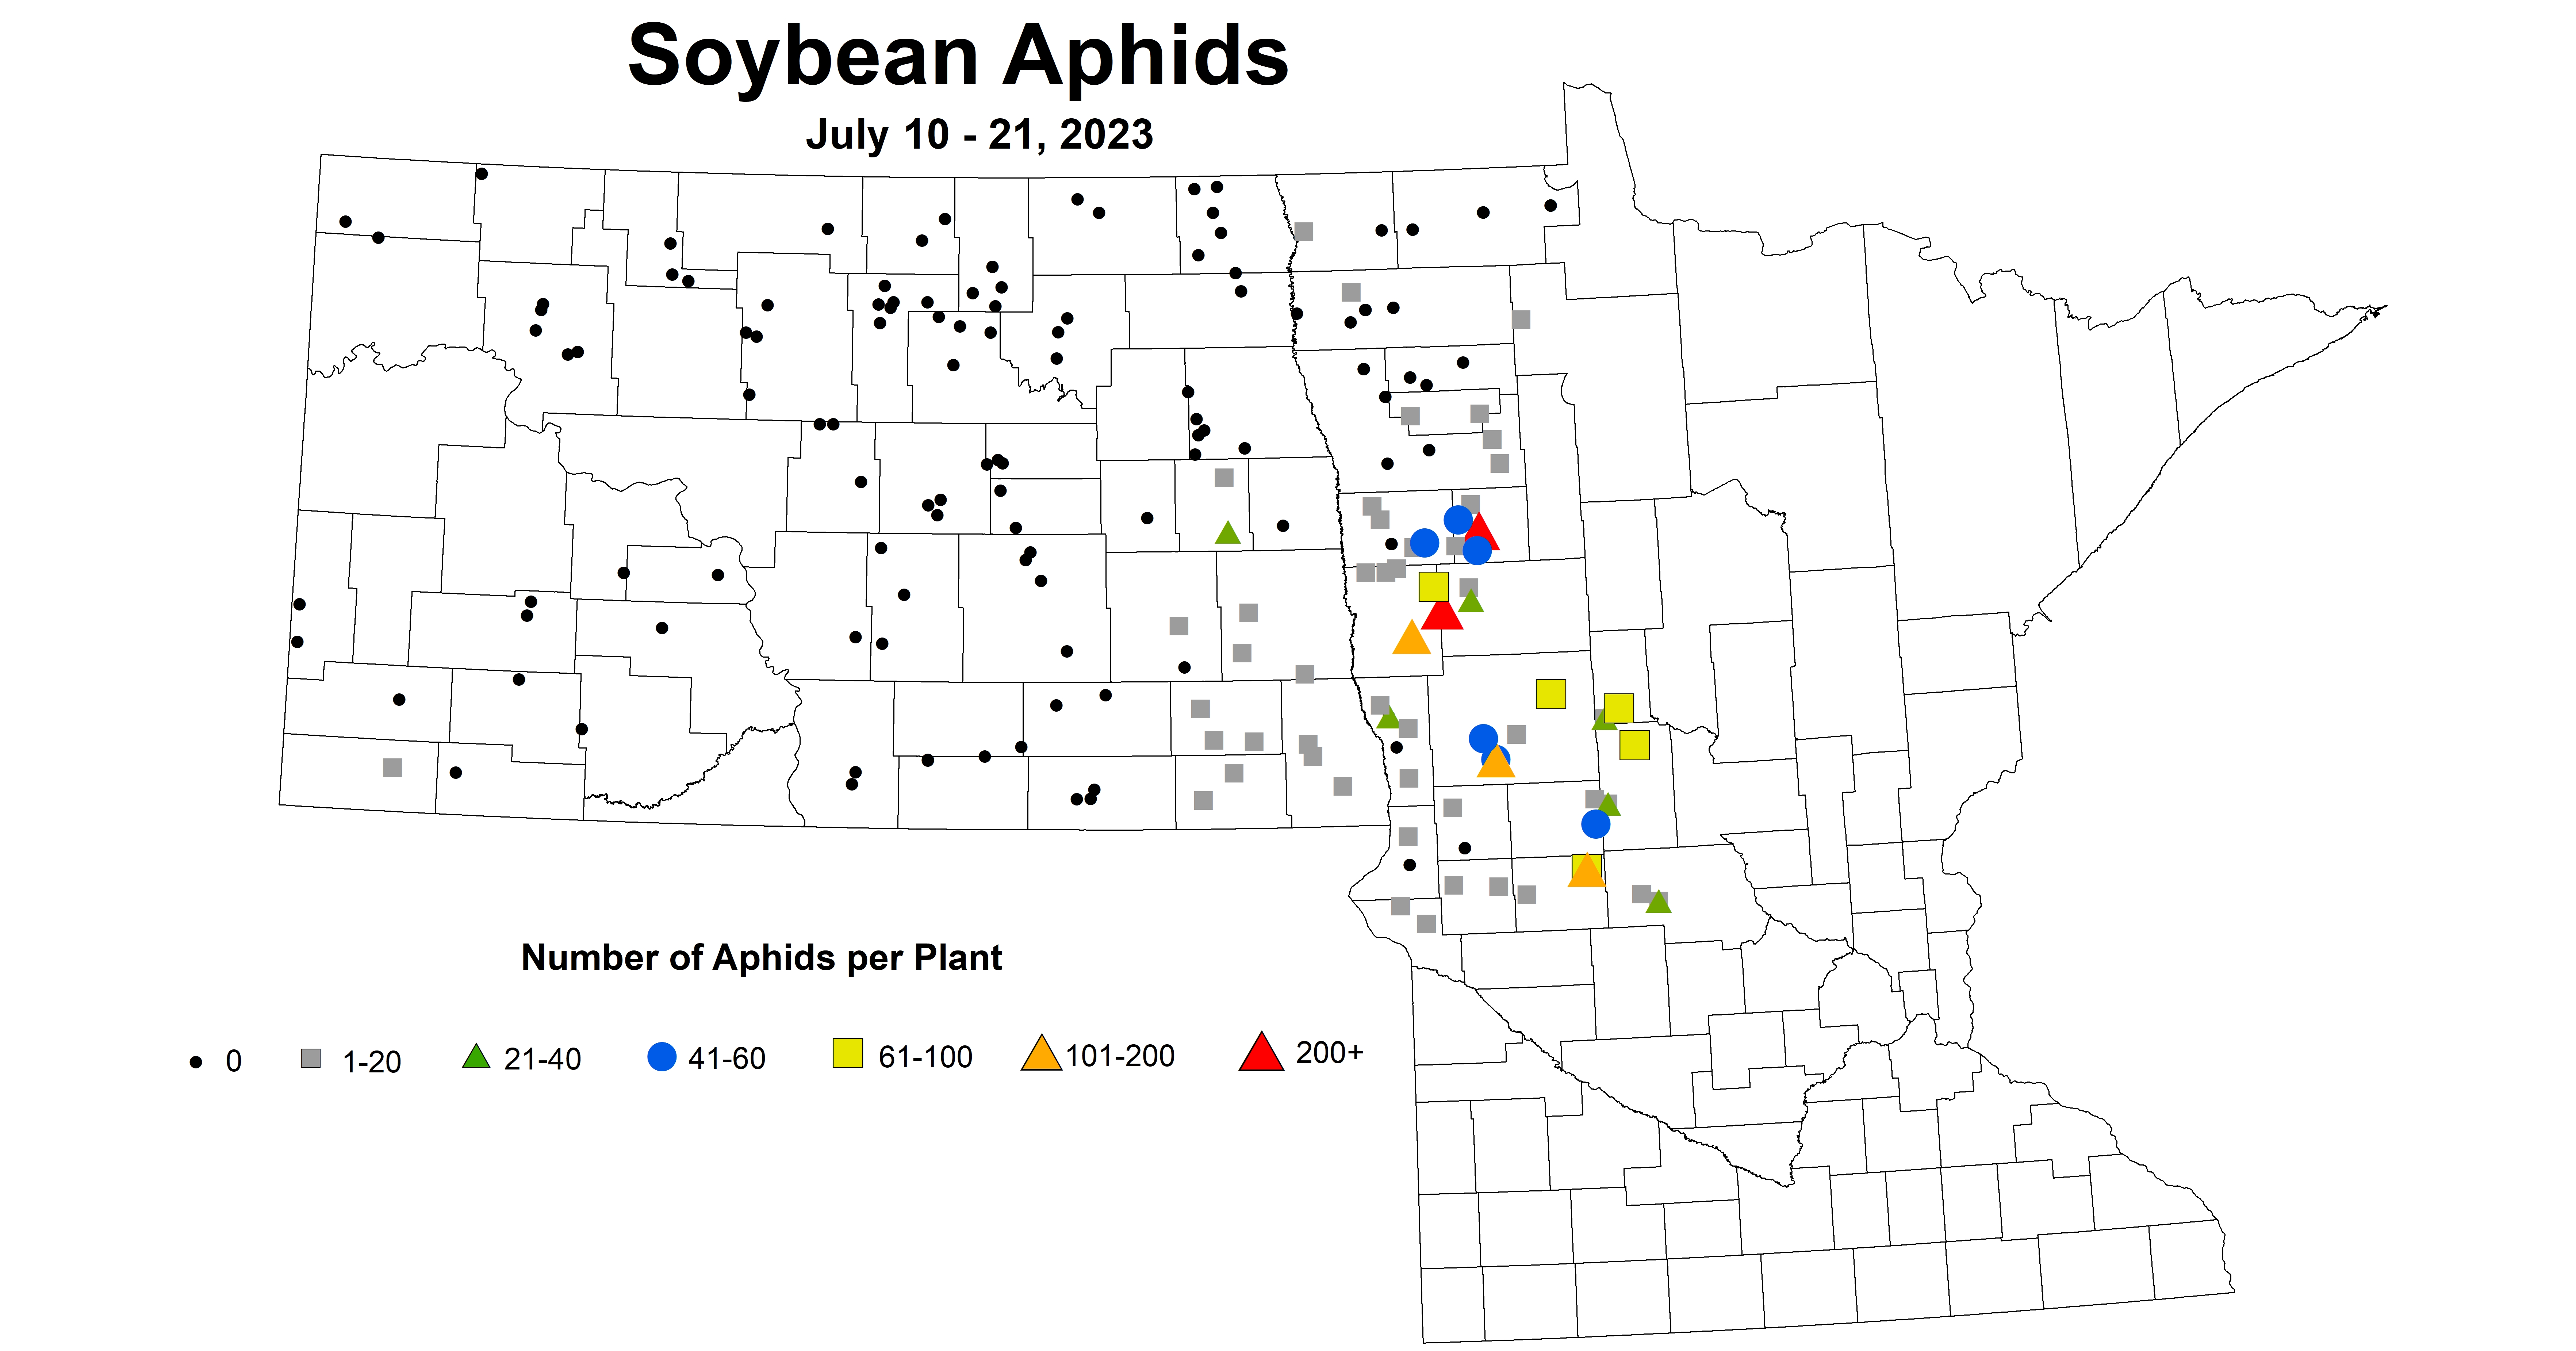 soybean aphid number July 10-21 2023